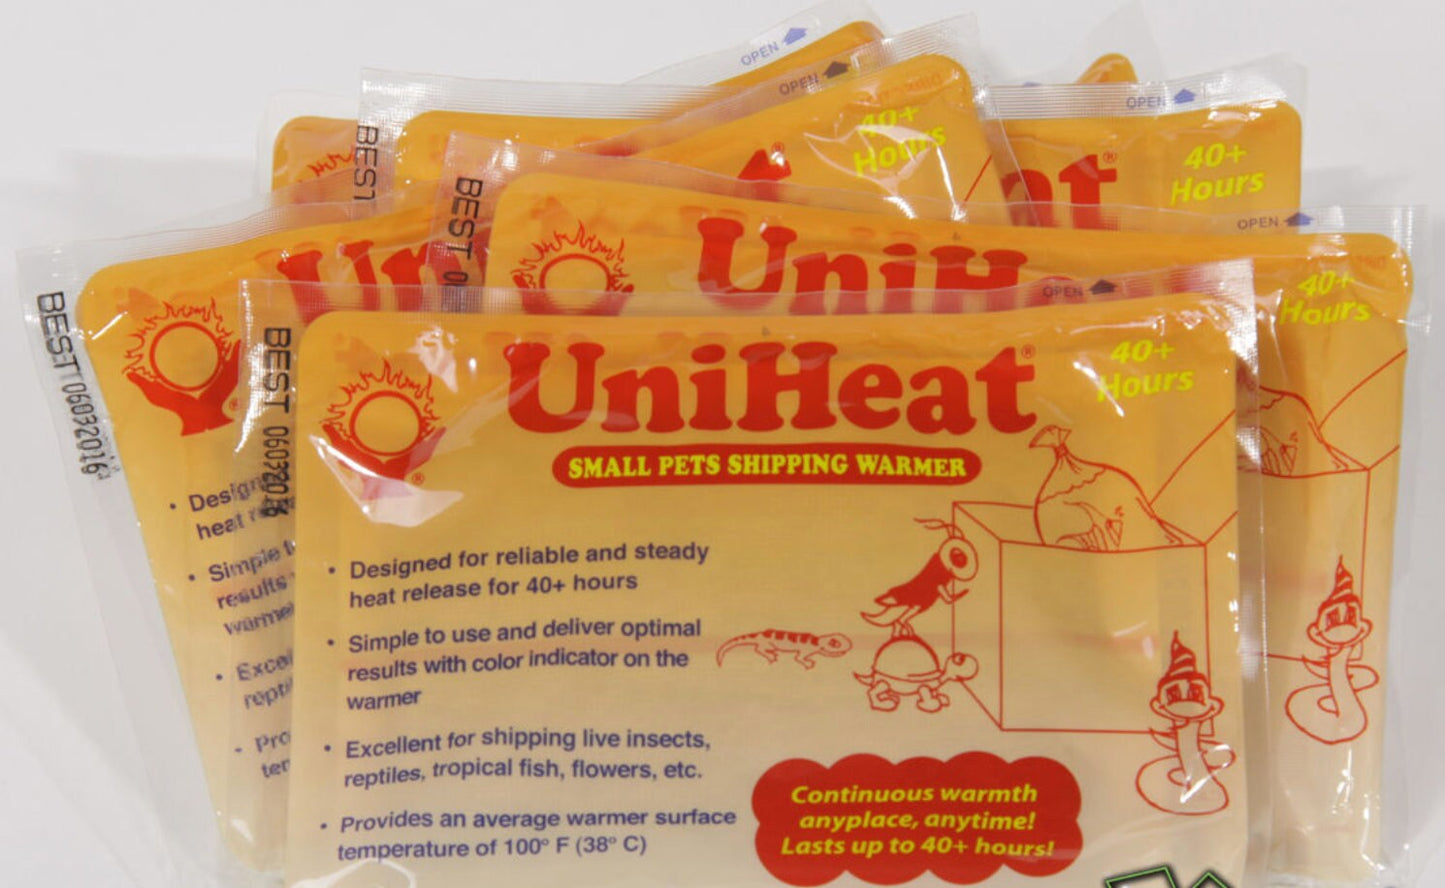 UniHeat 40 Hour Shipping Warmers - Disposable Heat Packs - Fresh & 40 HR